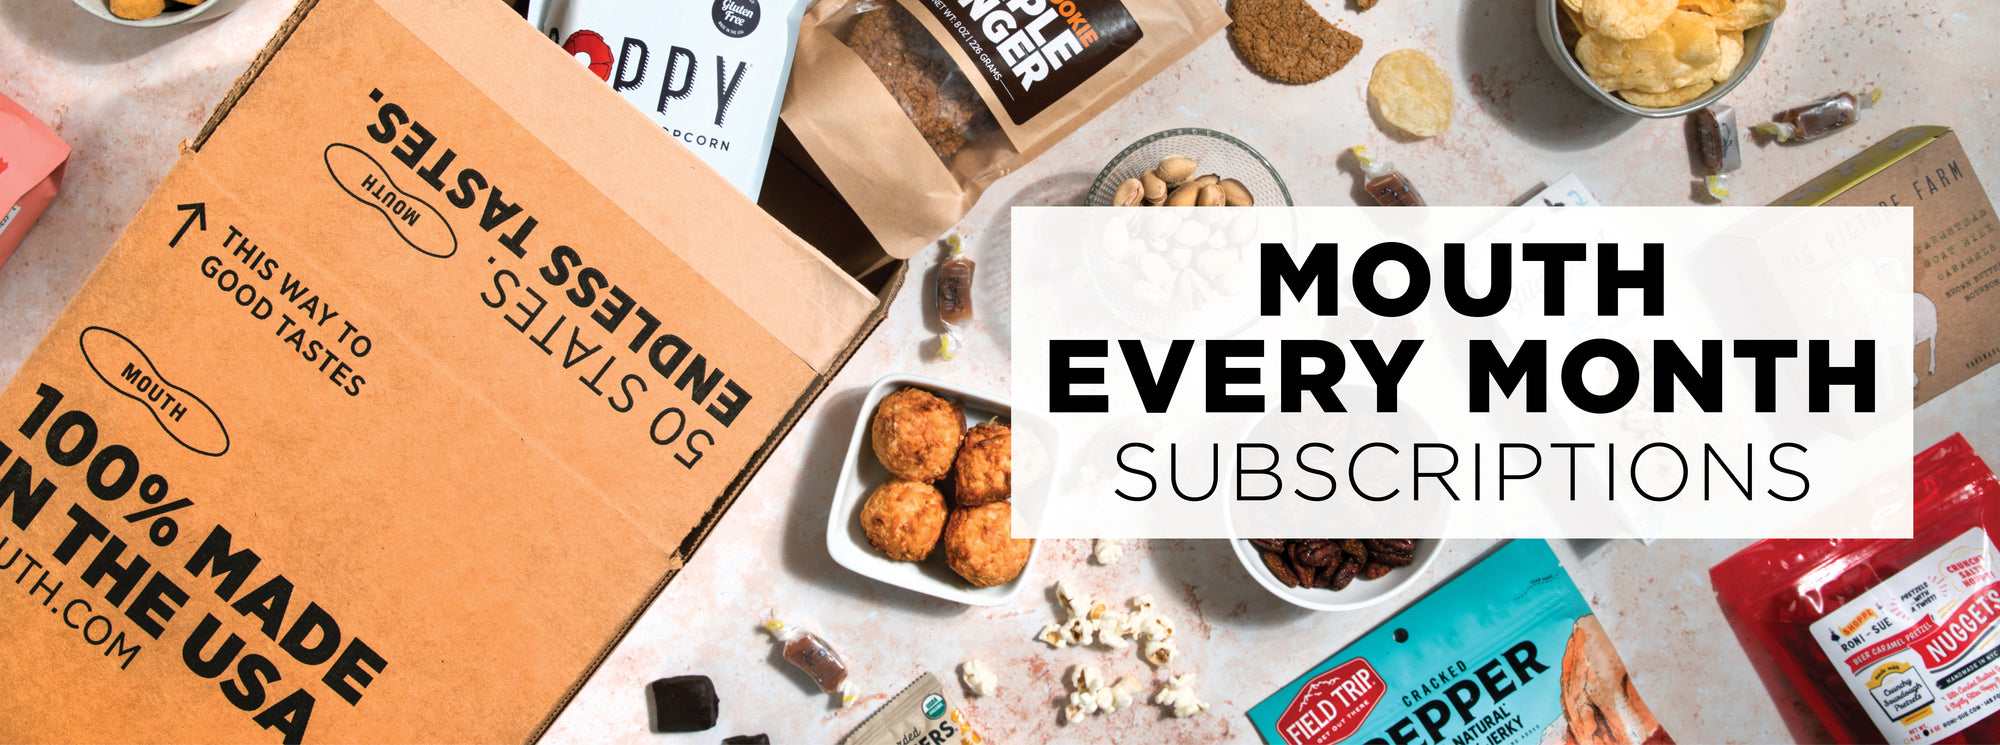 Mouth.com Snacks Subscriptions